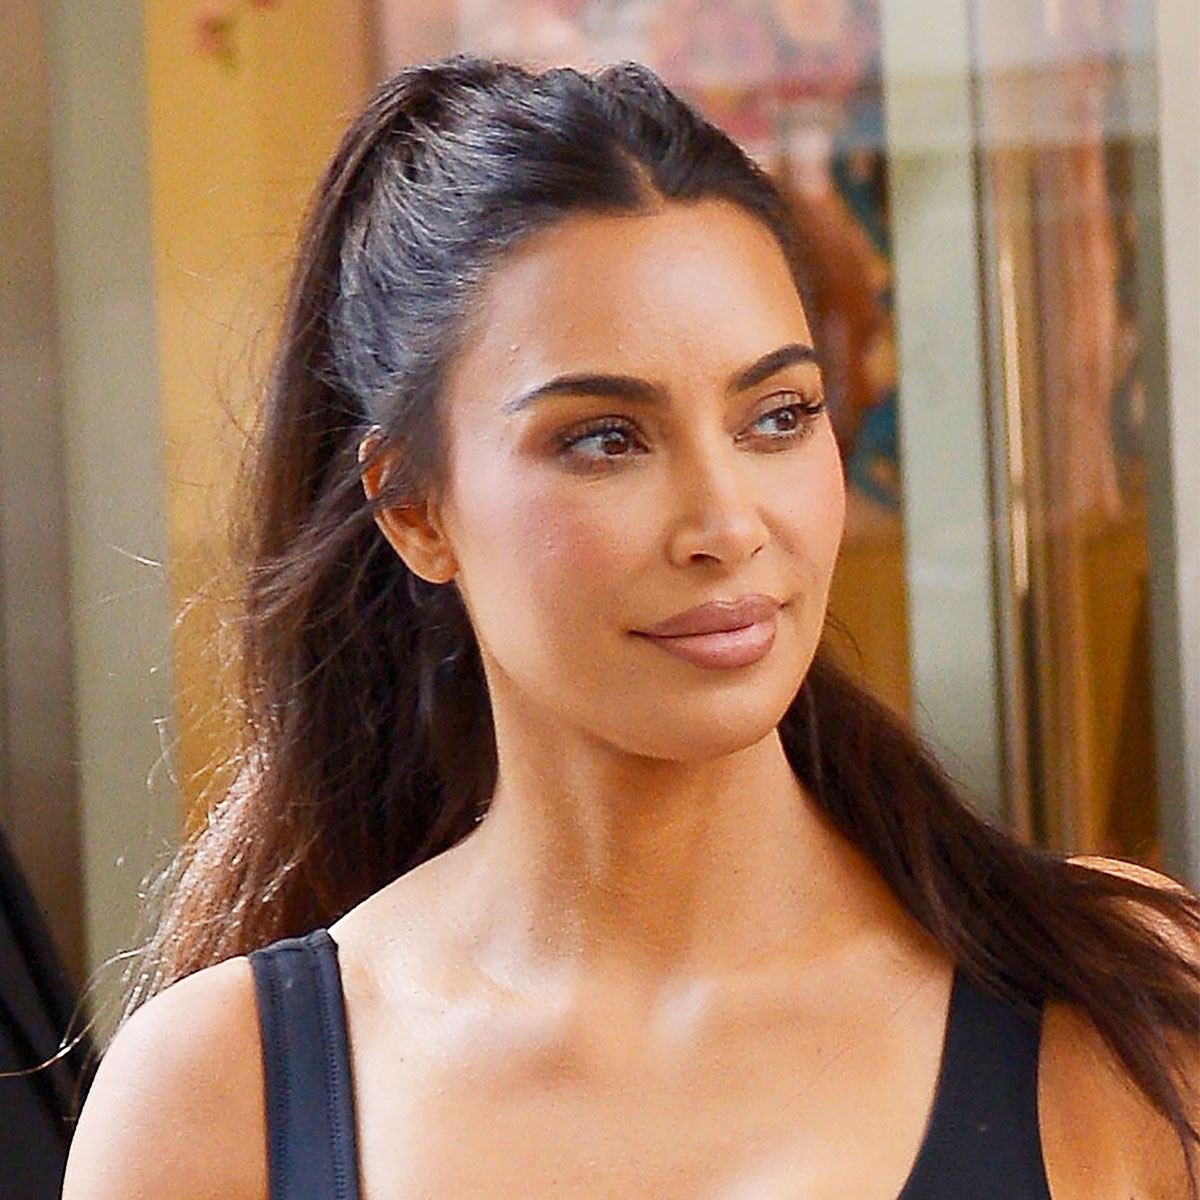 Kim Kardashian Flaunts Her Iconic Curves In An Unzipped Swimsuit